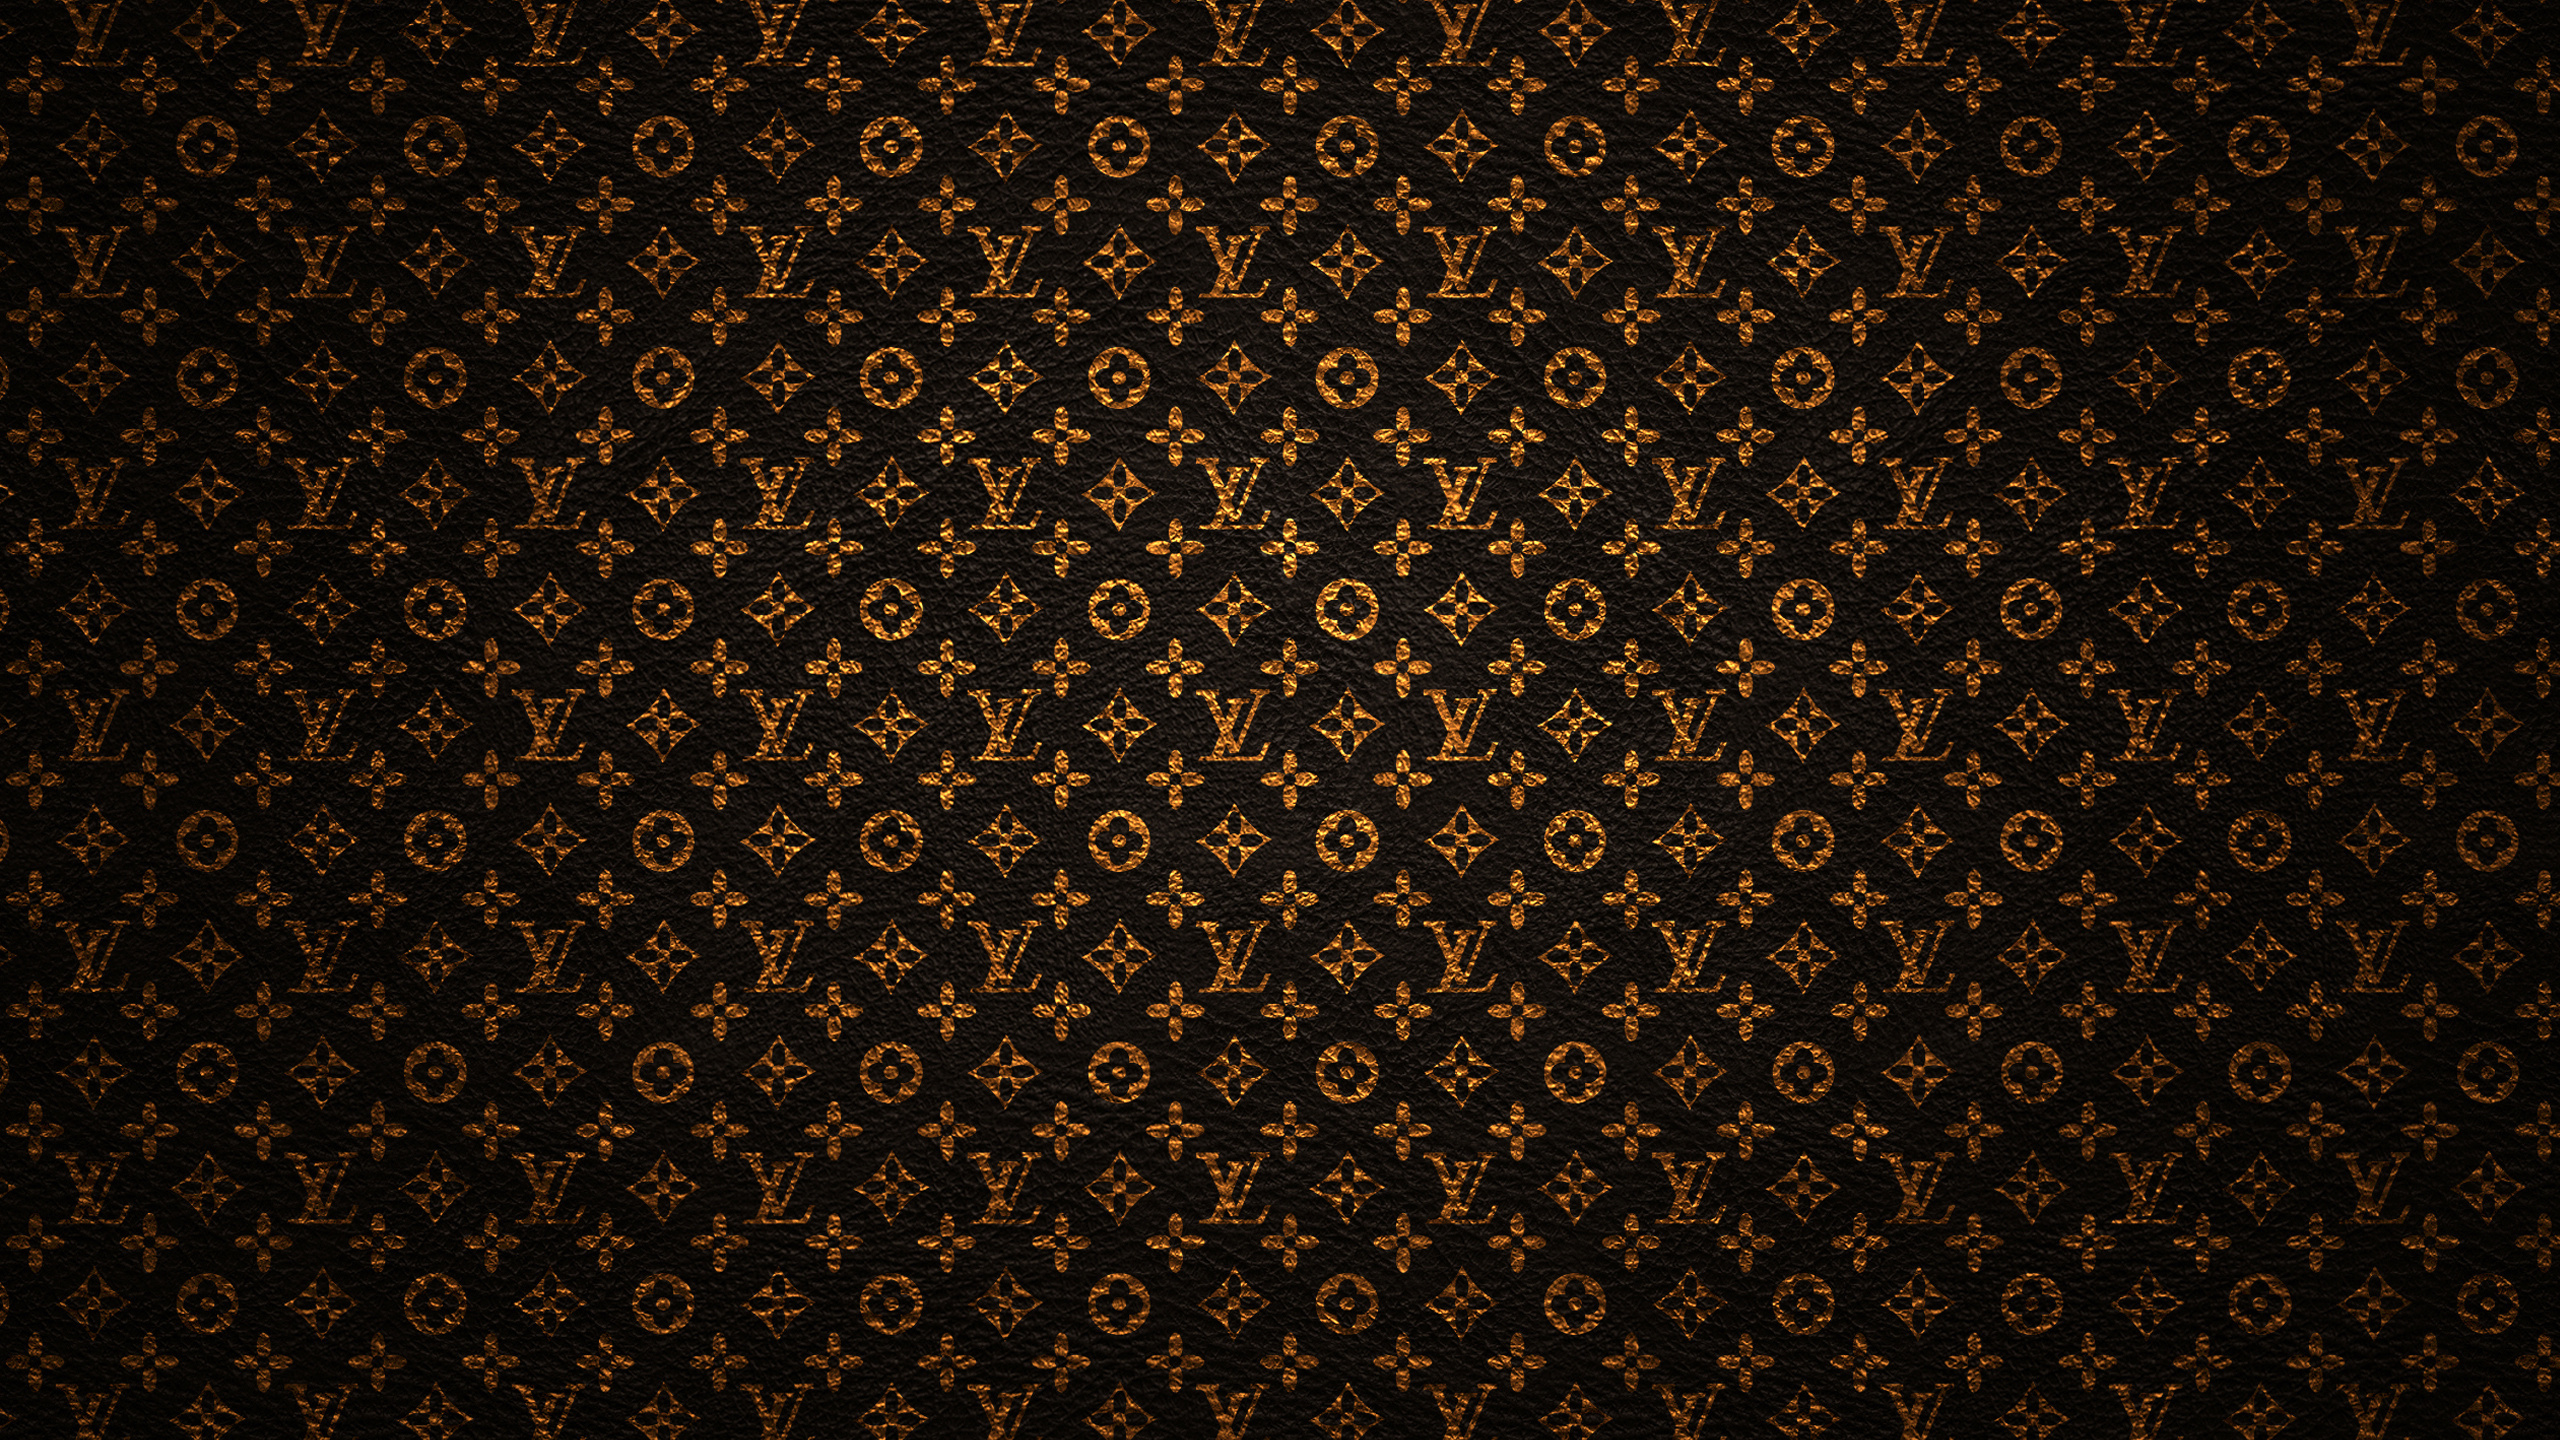 Products Louis Vuitton 2560x1440